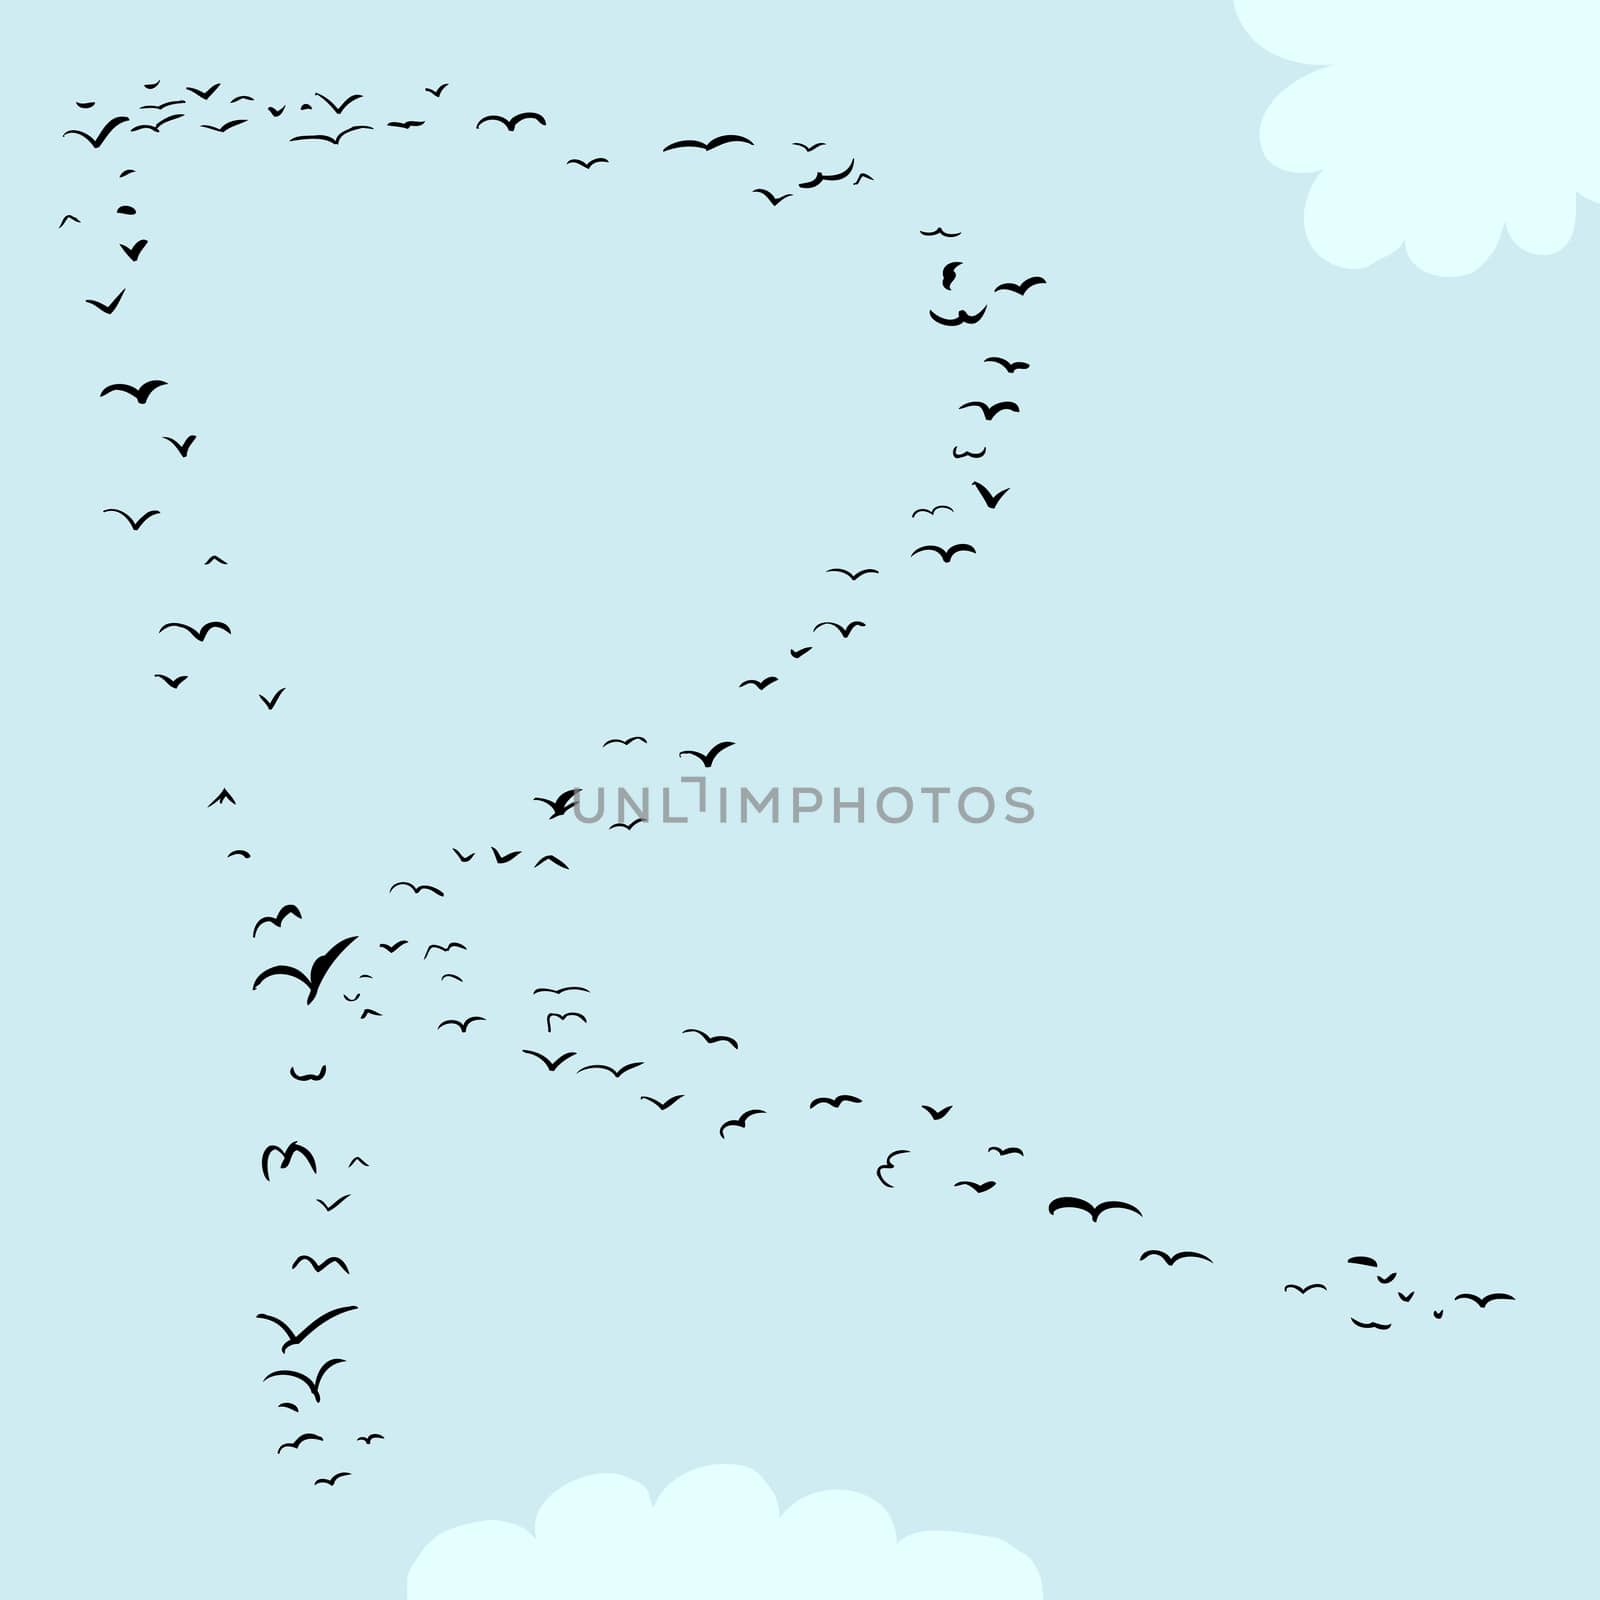 Illustration of a flock of birds in the shape of the letter r